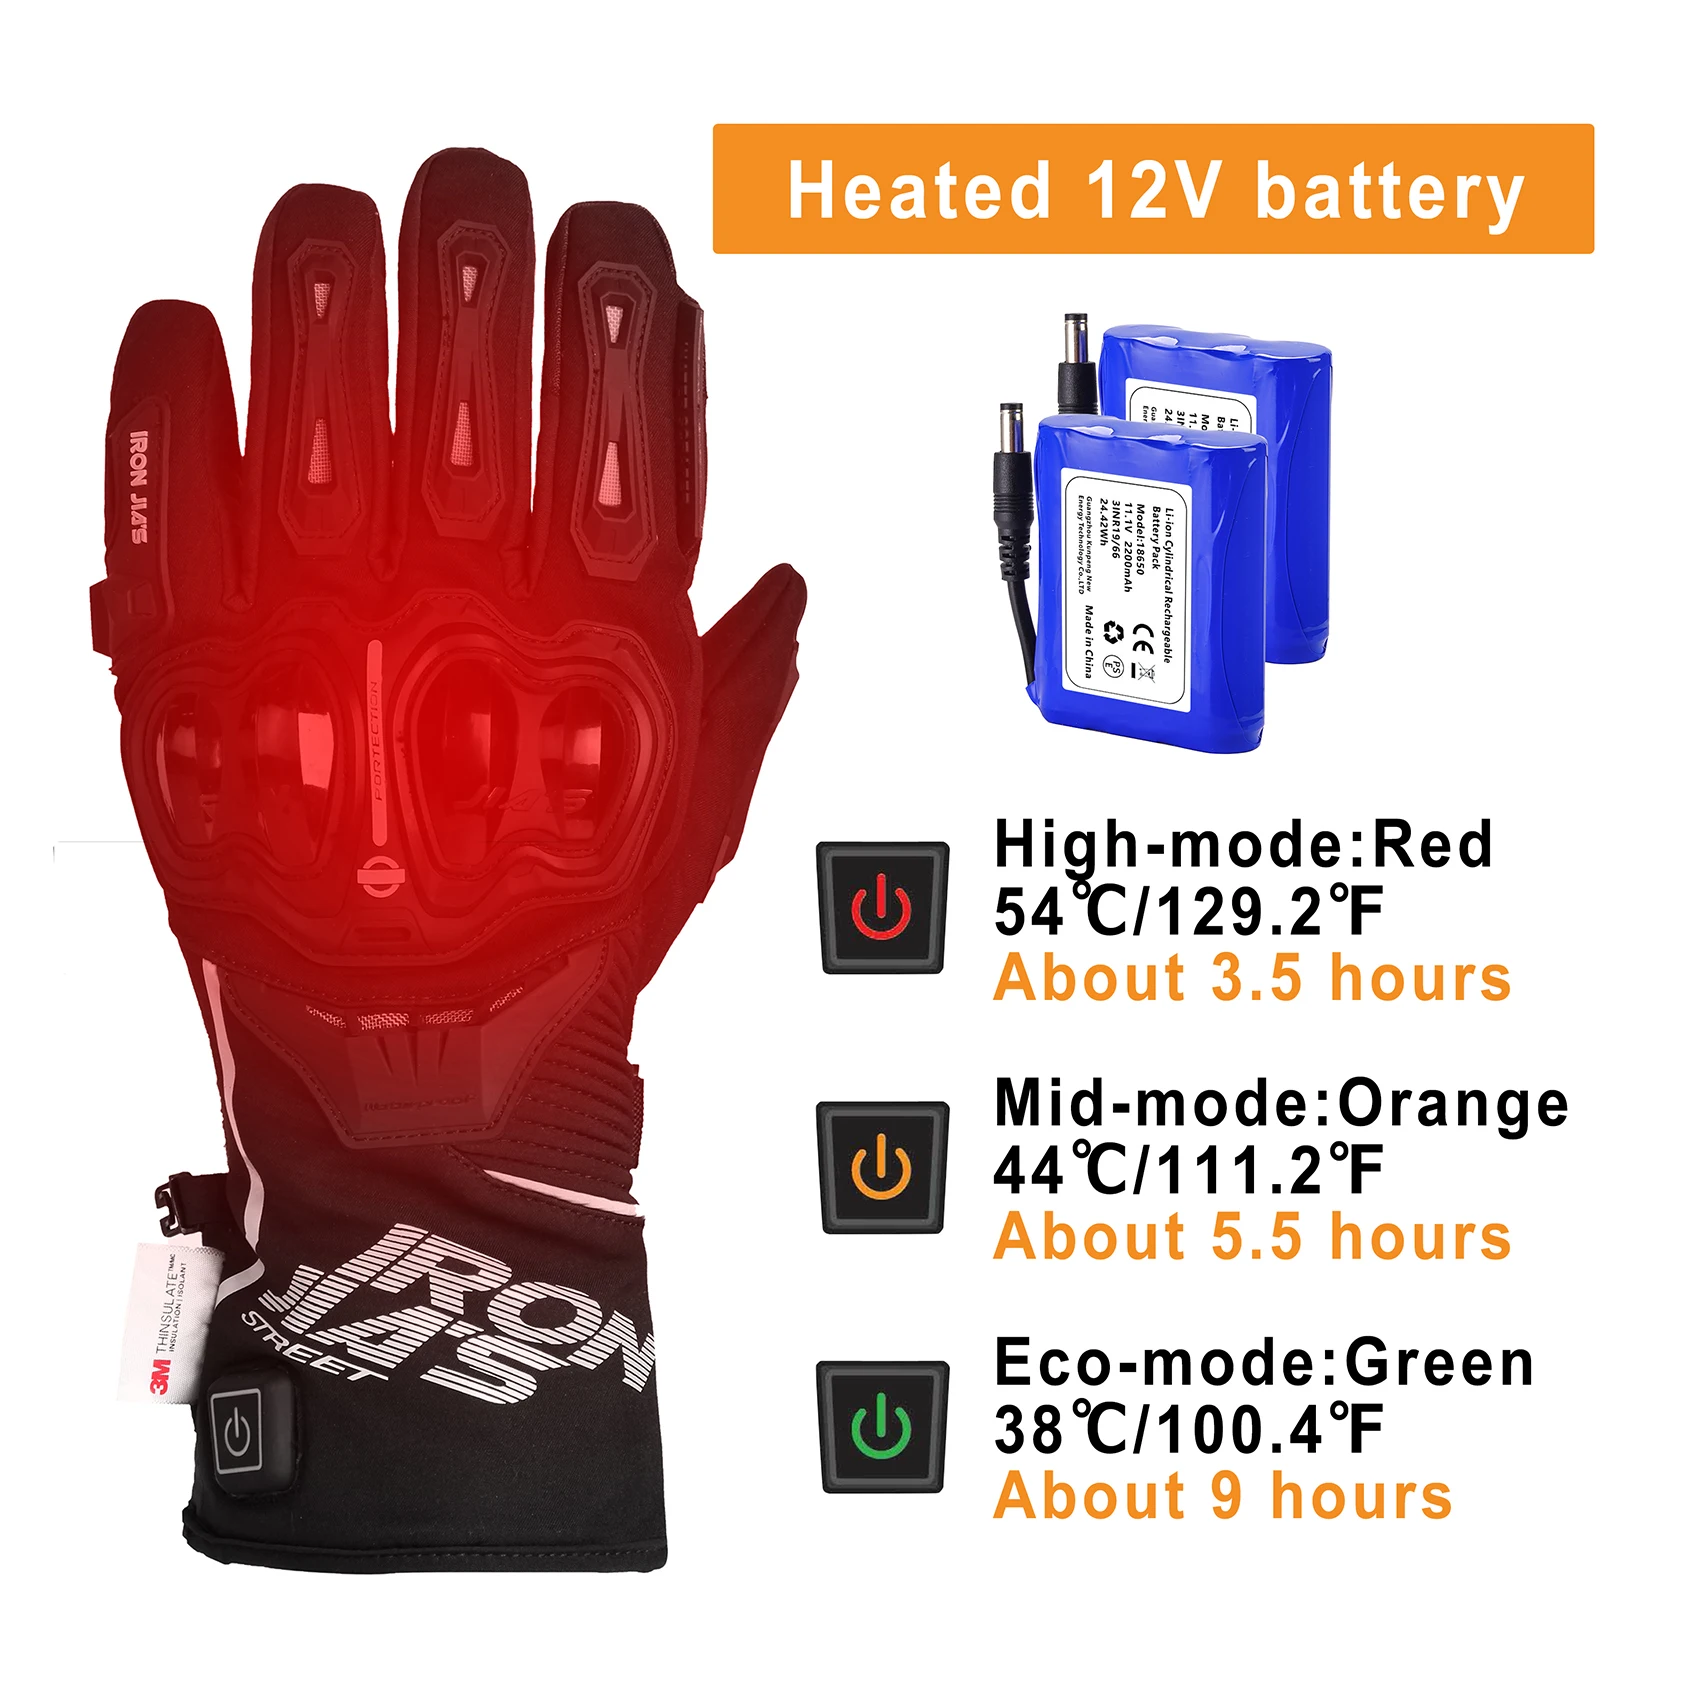 IRON JIA'S Heating Motorcycle Gloves Touch Screen Winter Moto Heated 12V Vehicle Battery Powered Gloves Snowboarding Motorbike enlarge